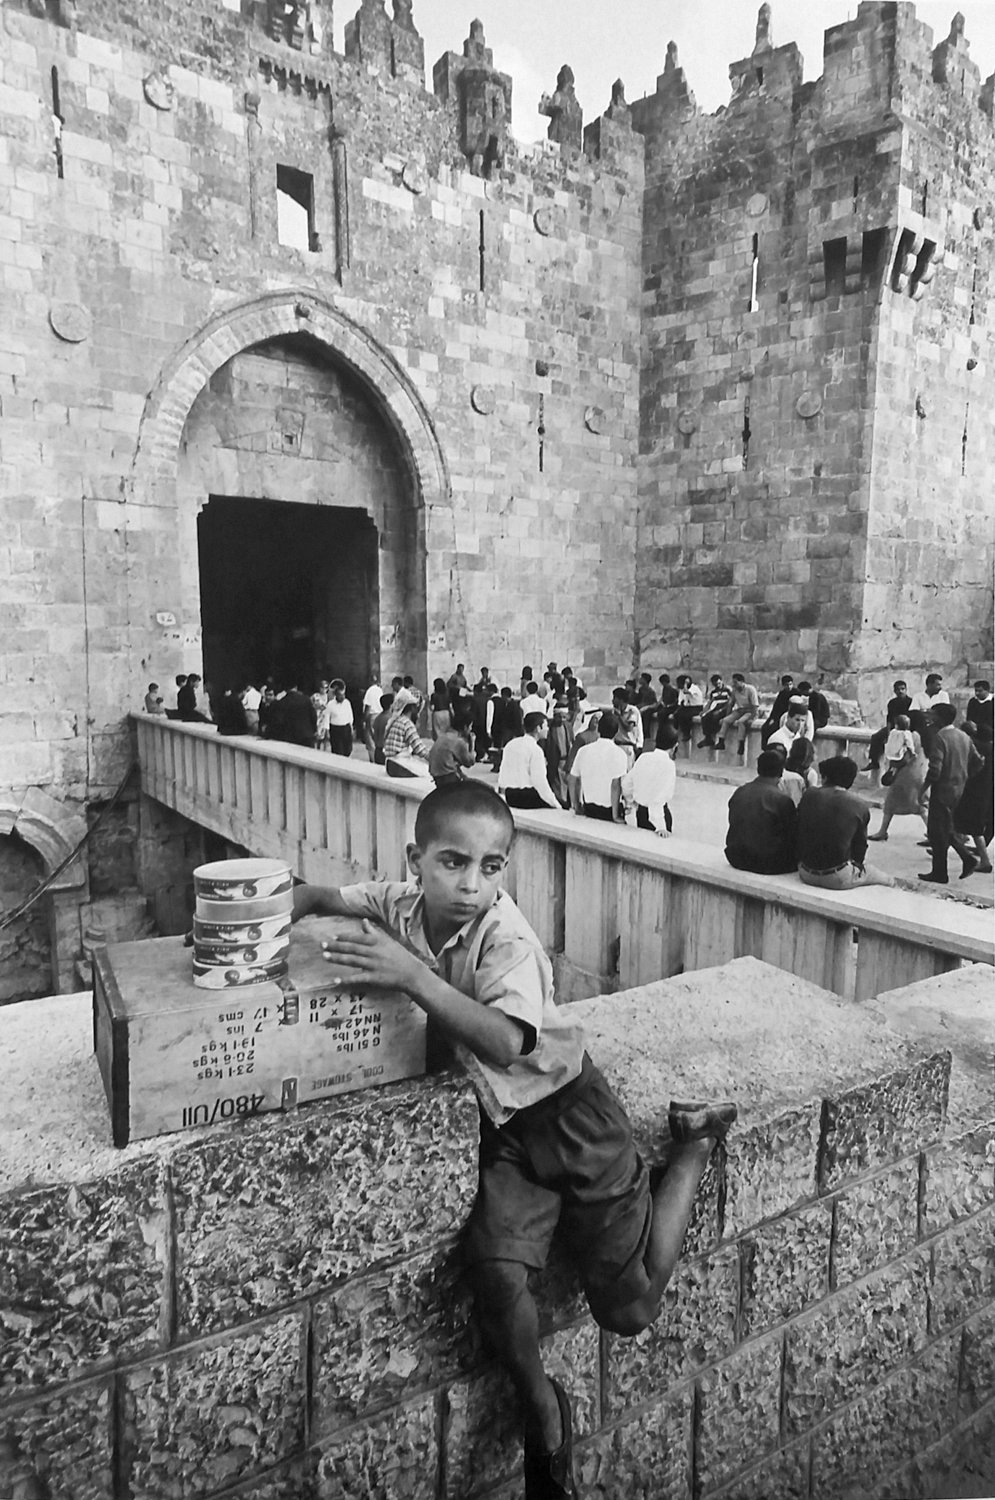 An Arab fish seller is stationed near the Damascus Gate in Jerusalem in a 1967 photograph by Leonard Freed.